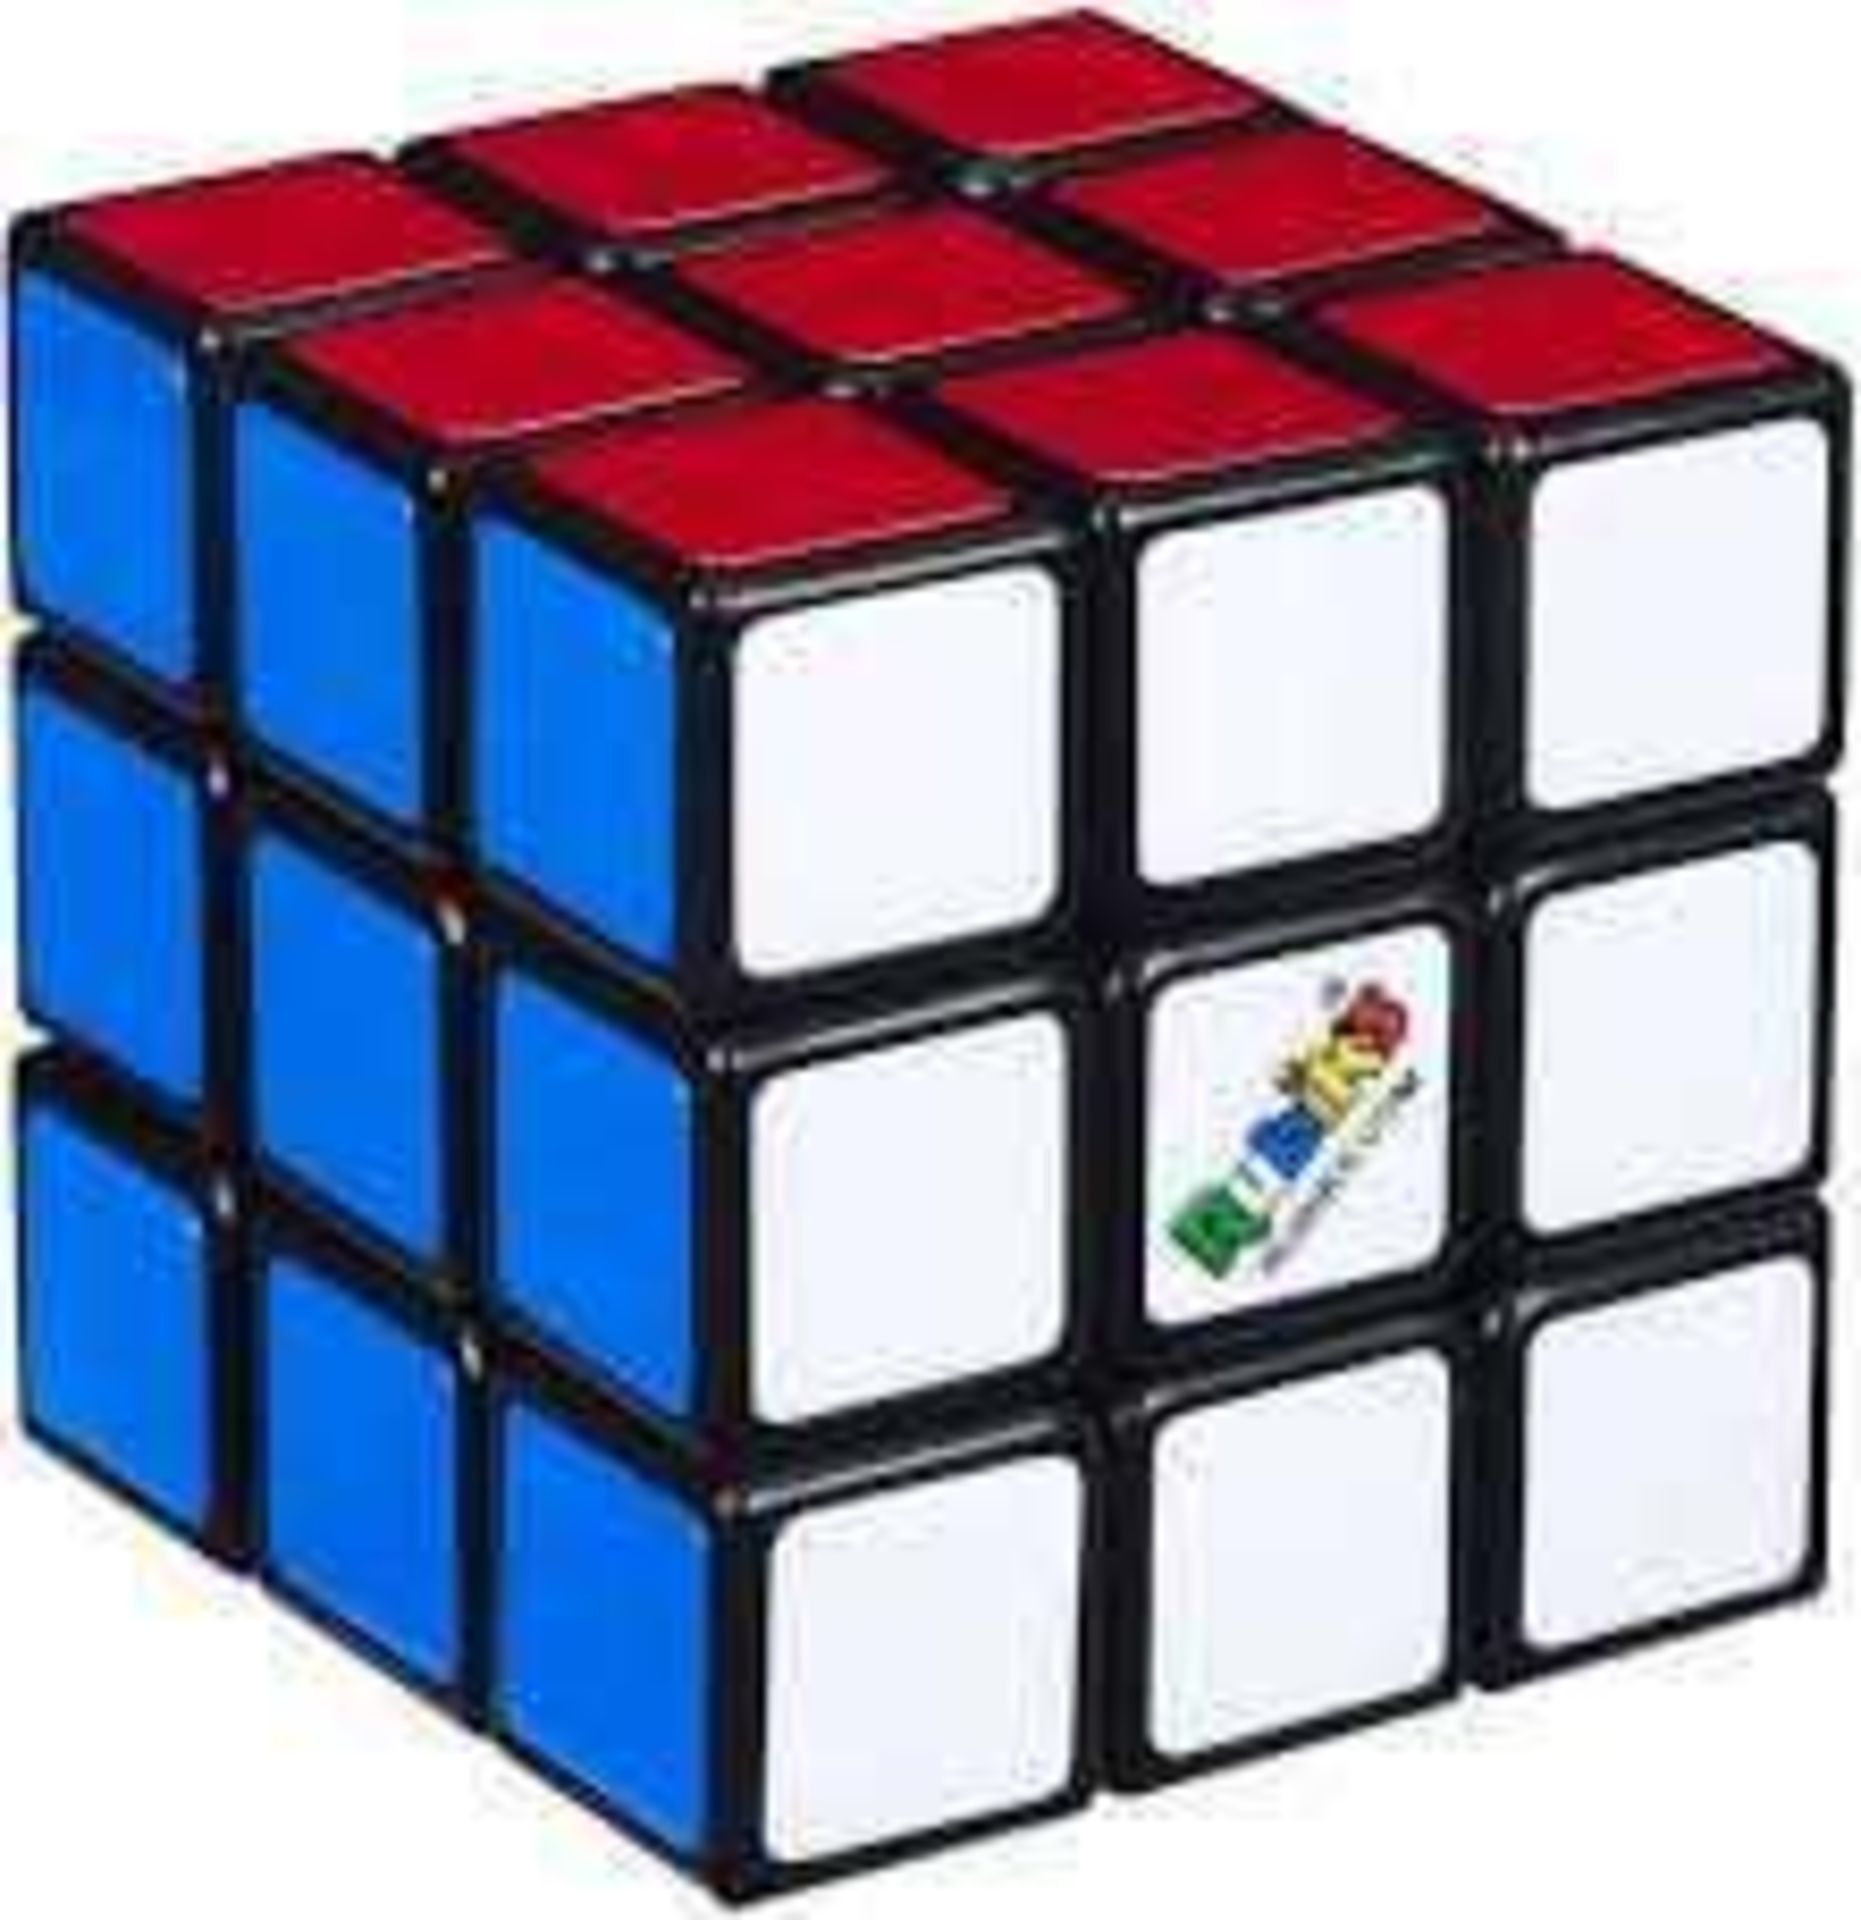 Combined RRP £200 Lot To Contain 10 Boxed The Original 3X3 Rubik's Cube